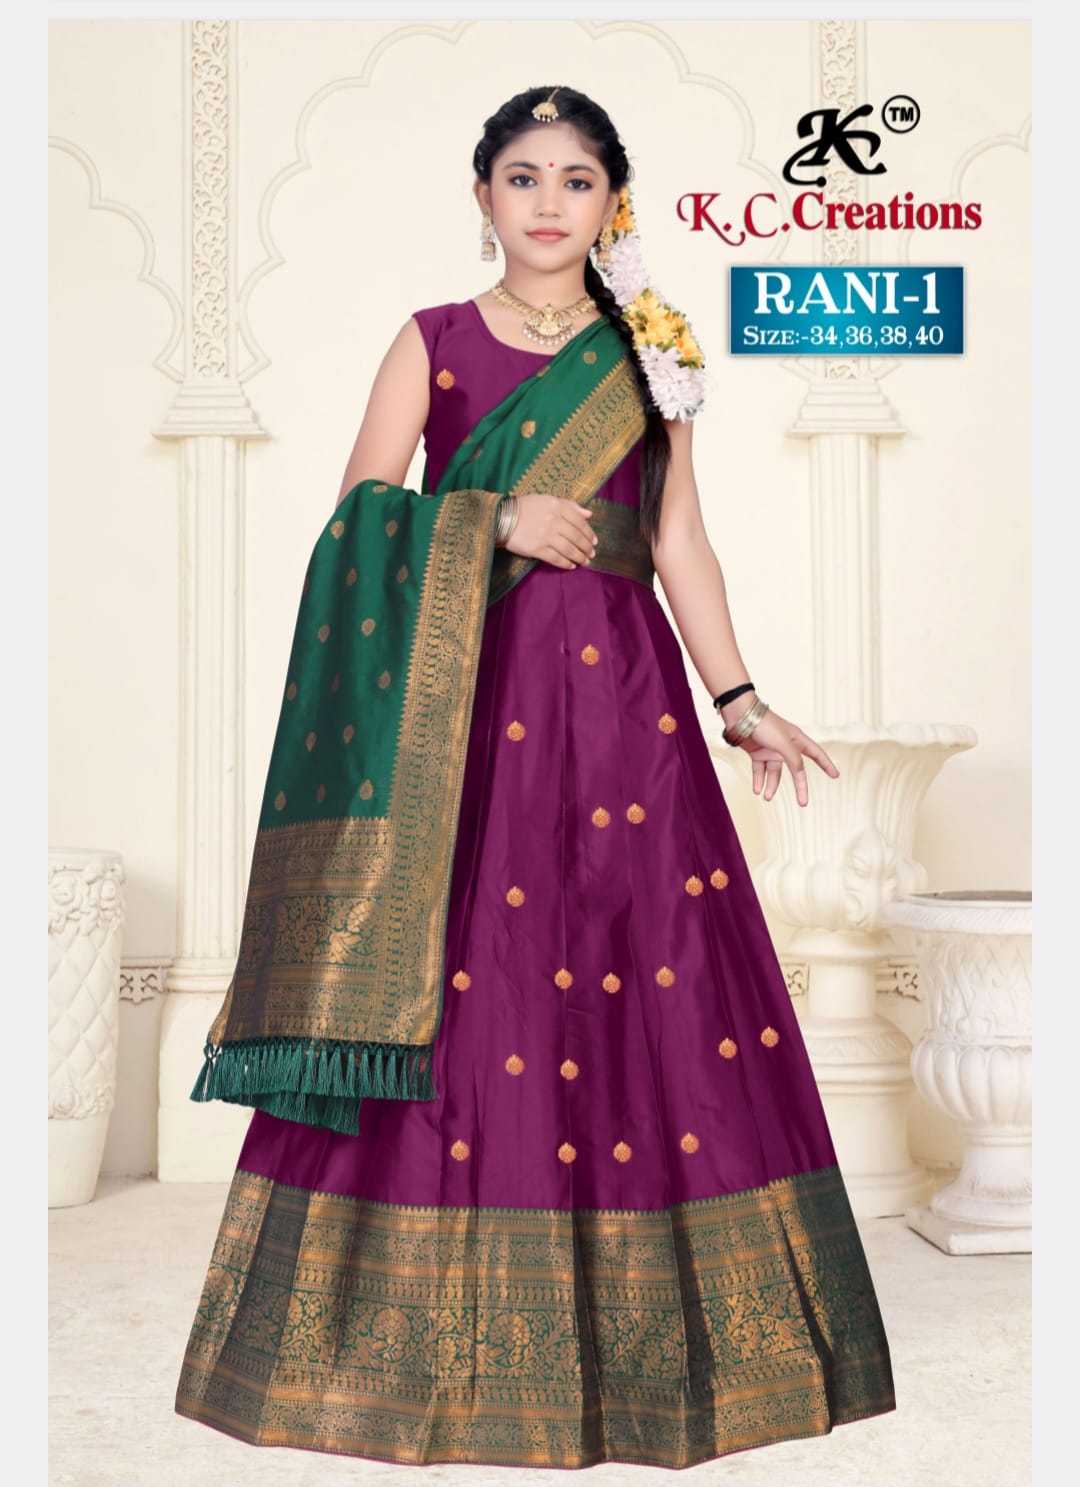 kc creation rani vol 1 amazing festive girls wear collection readymade long gown with dupatta